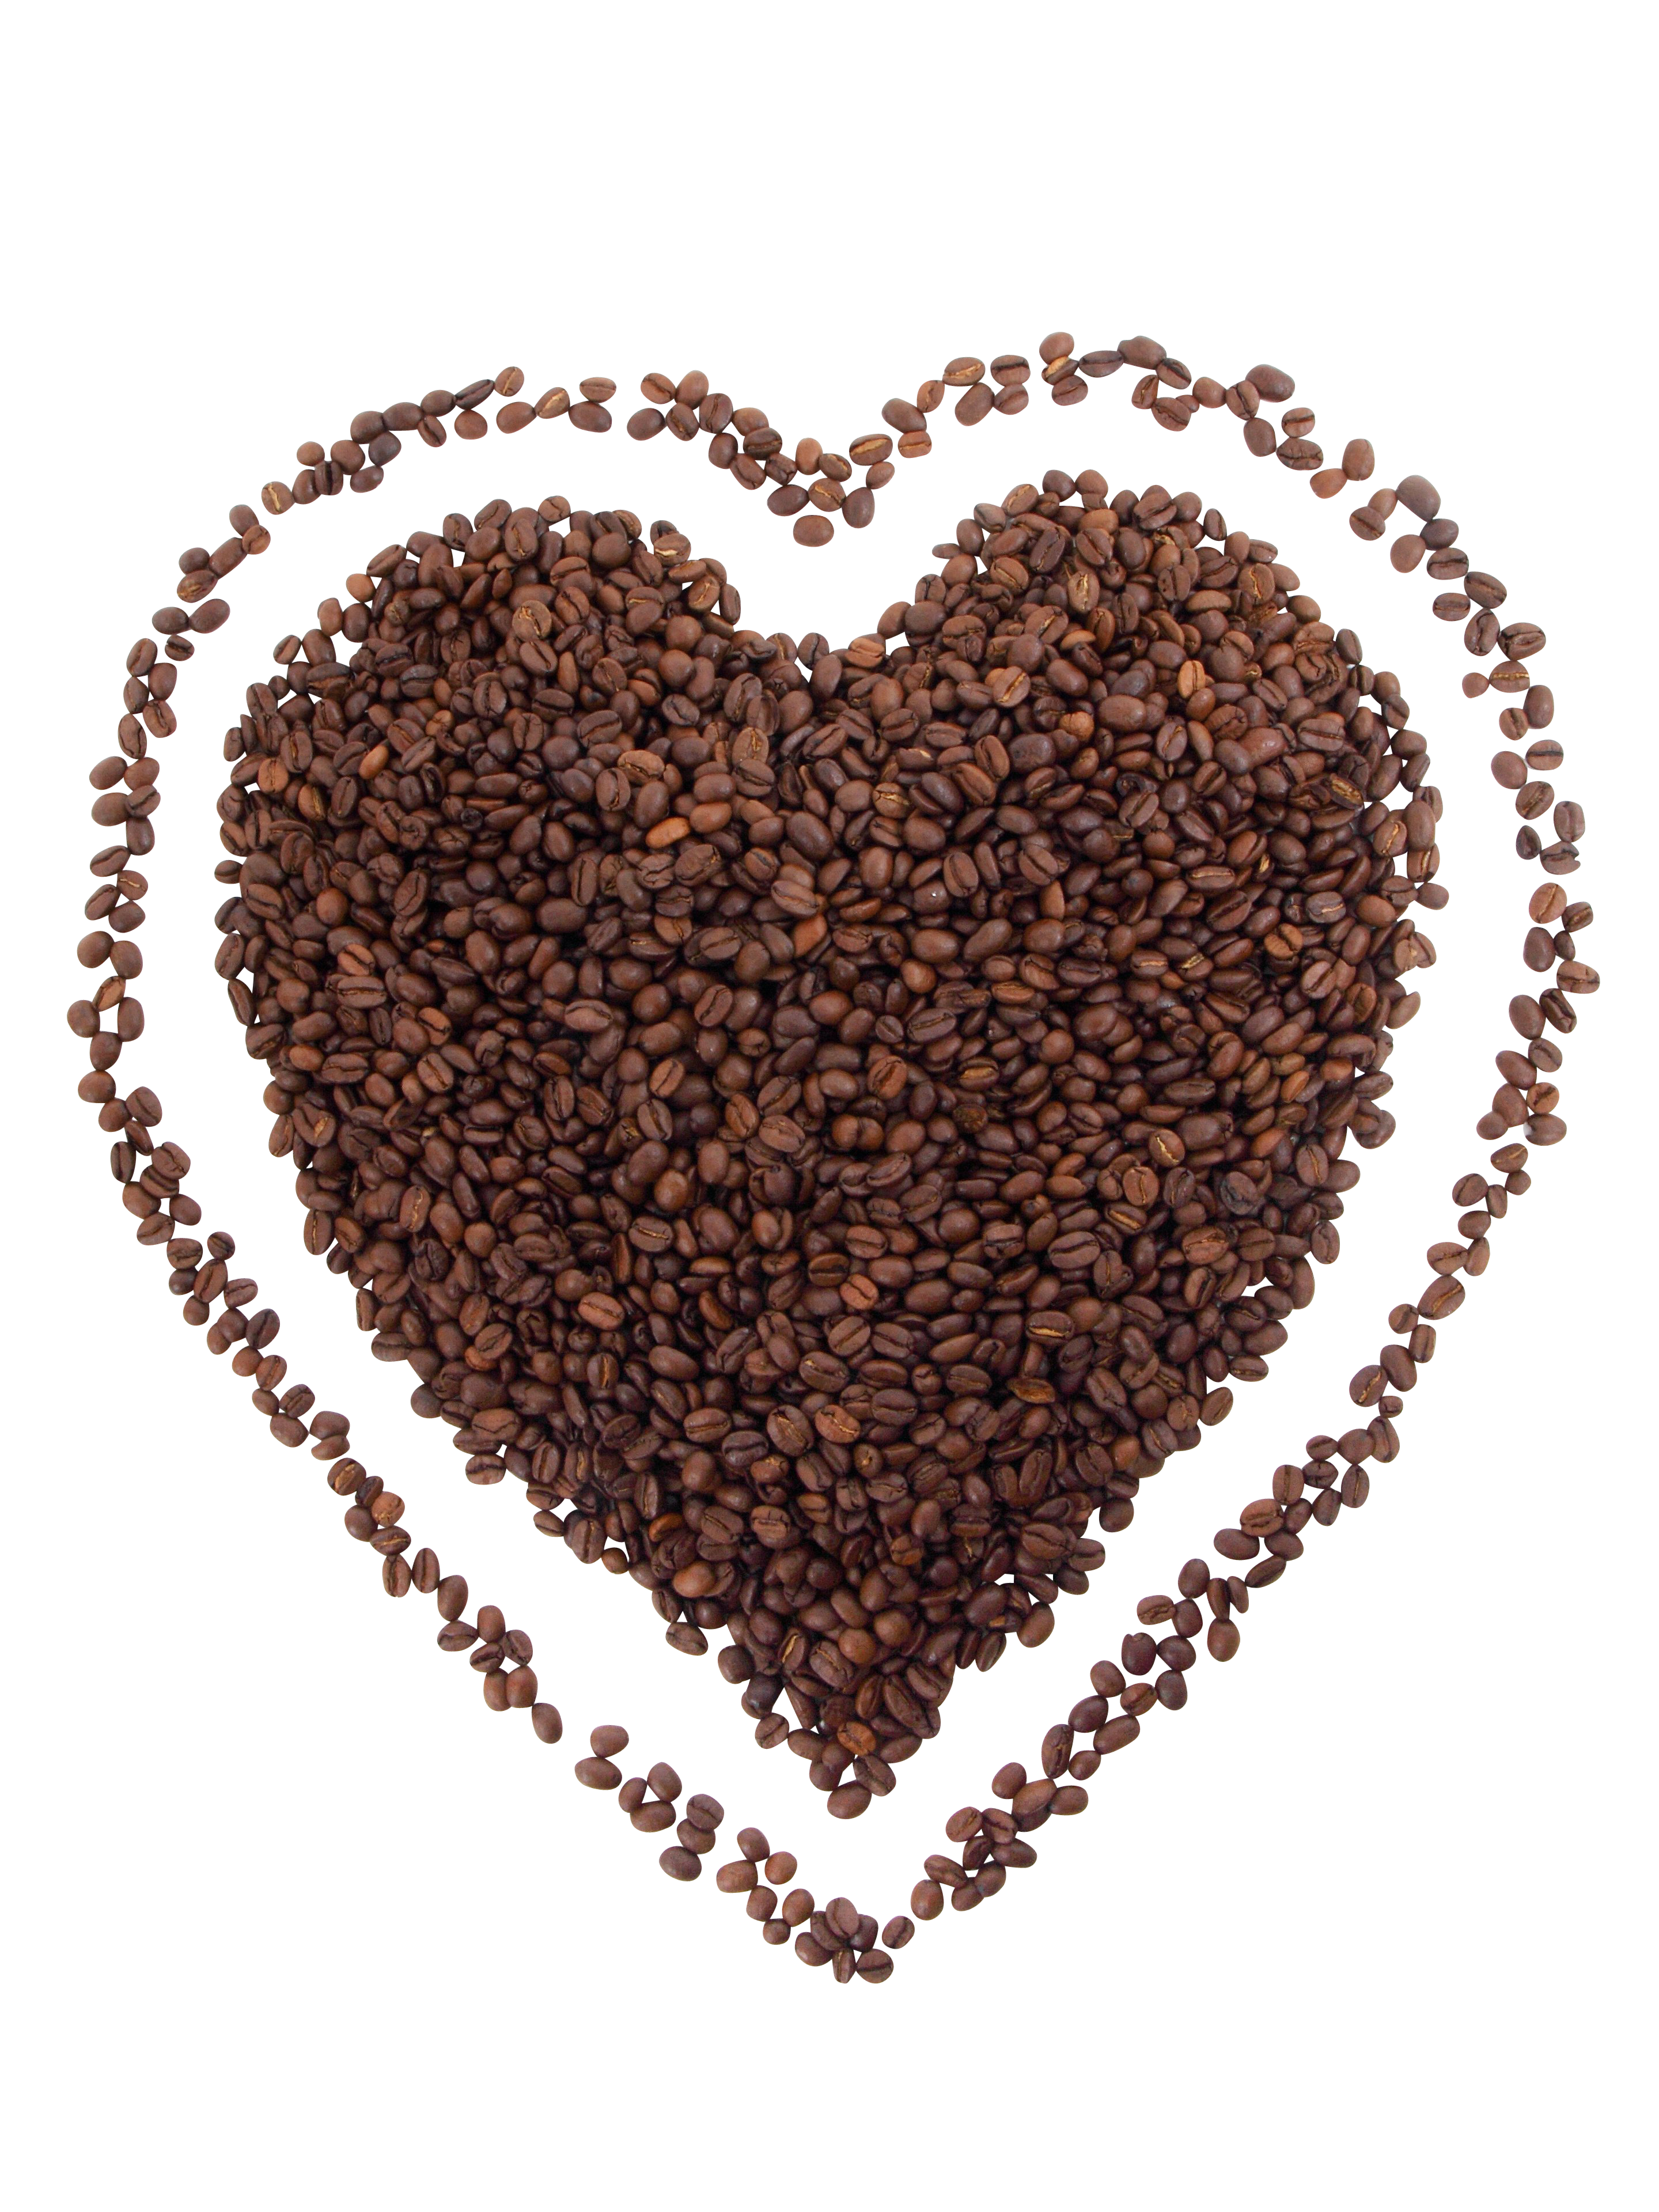 A Heart Made Of Coffee Beans